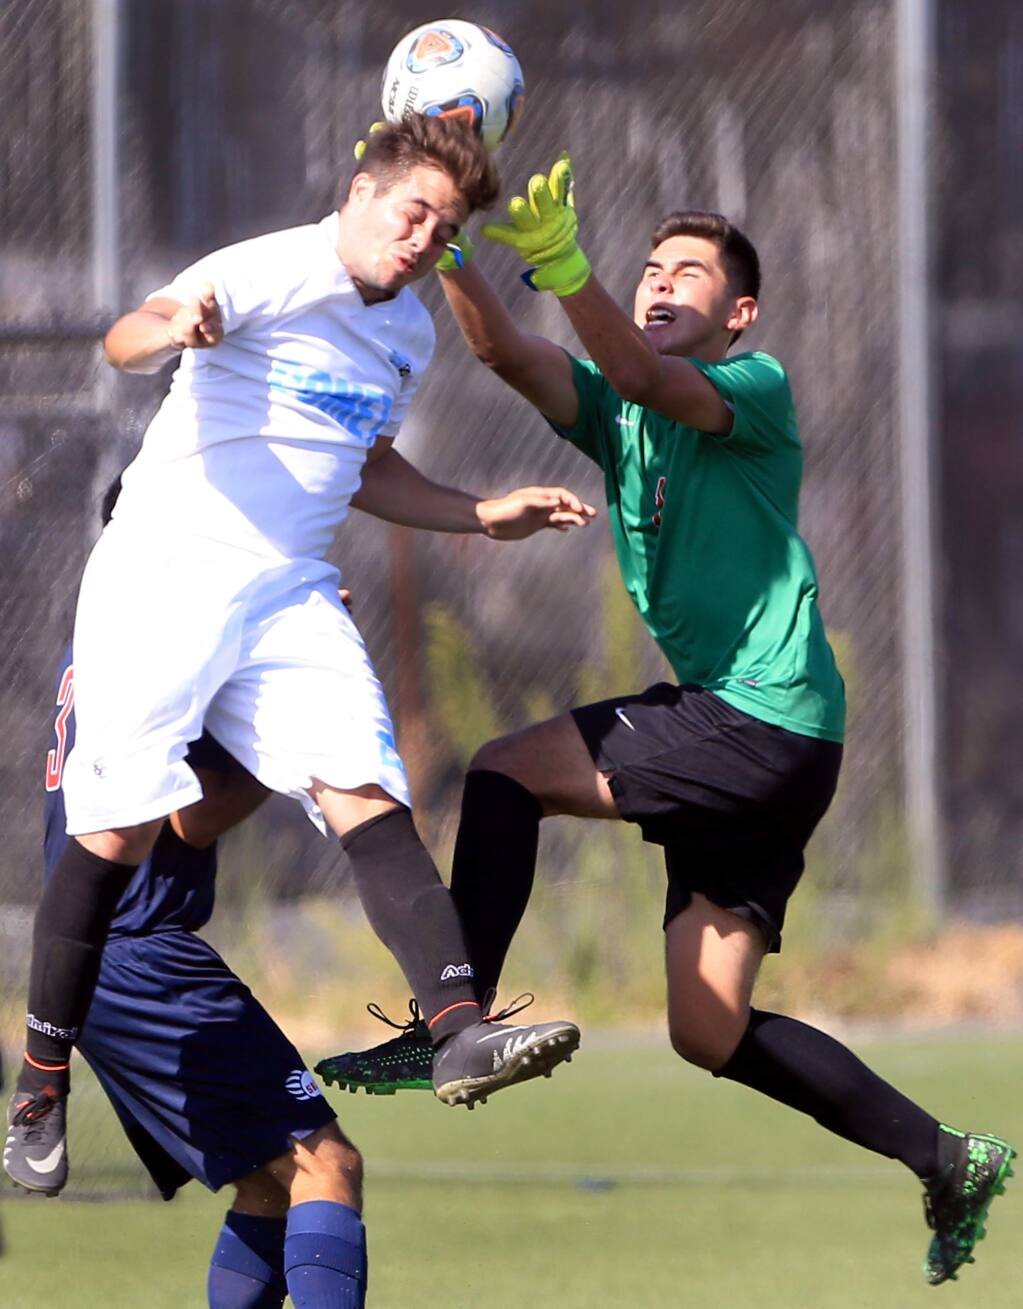 Santa Rosa Junior College goalkeeper Cristian Hernandez makes a save on goal over the header of Contra Costa's Eduardo Torres, during the Bear Cubs' home opening rout of the Comets. (Kent Porter / The Press Democrat)